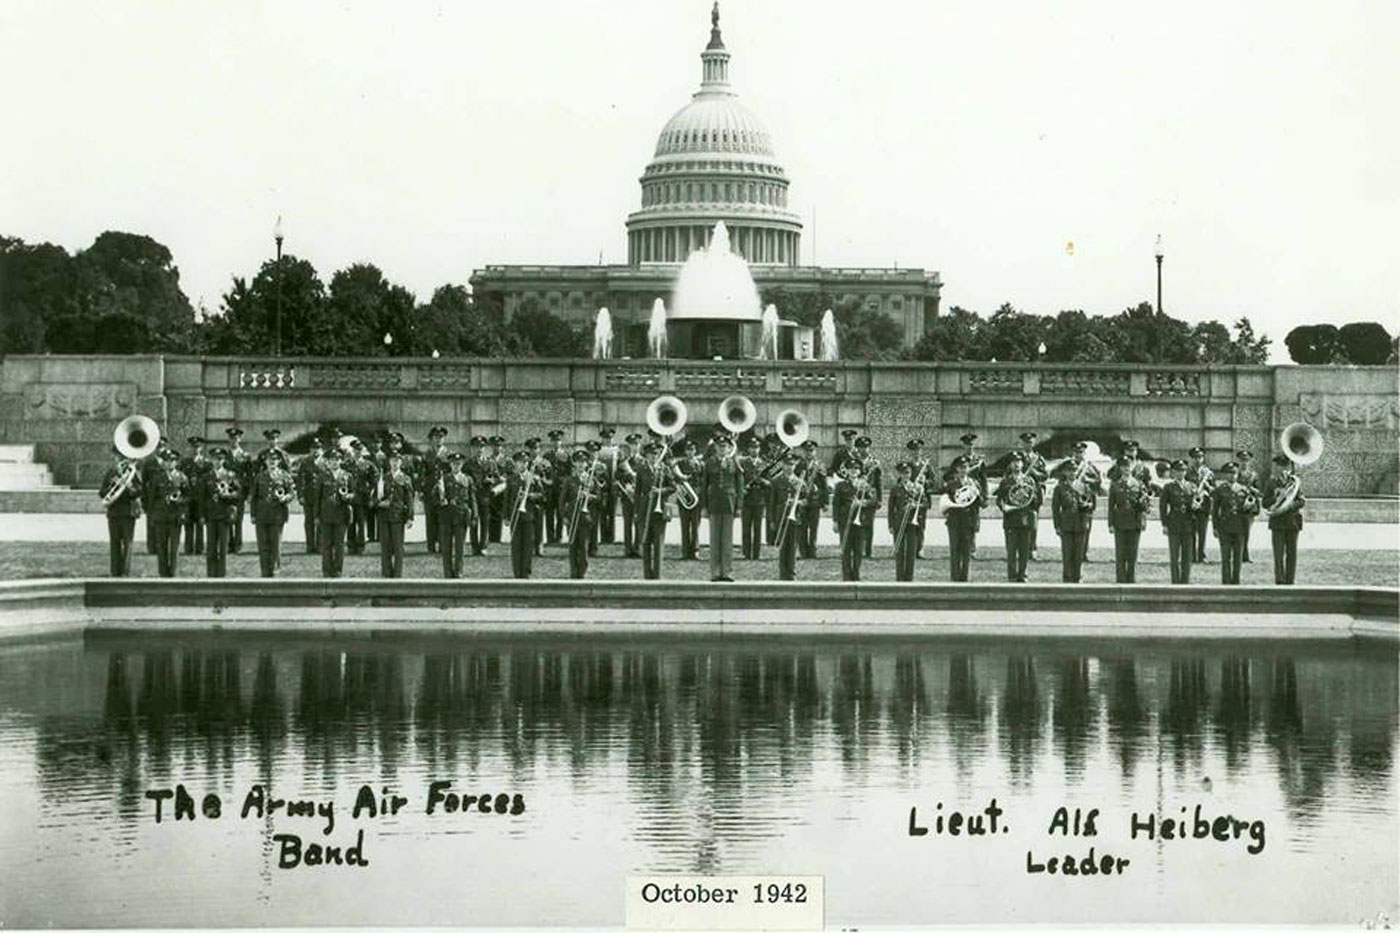 The U.S. Air Force Band in 1942 performing in front of the U.S. Capitol. (Courtesy U.S. Air Force Band)